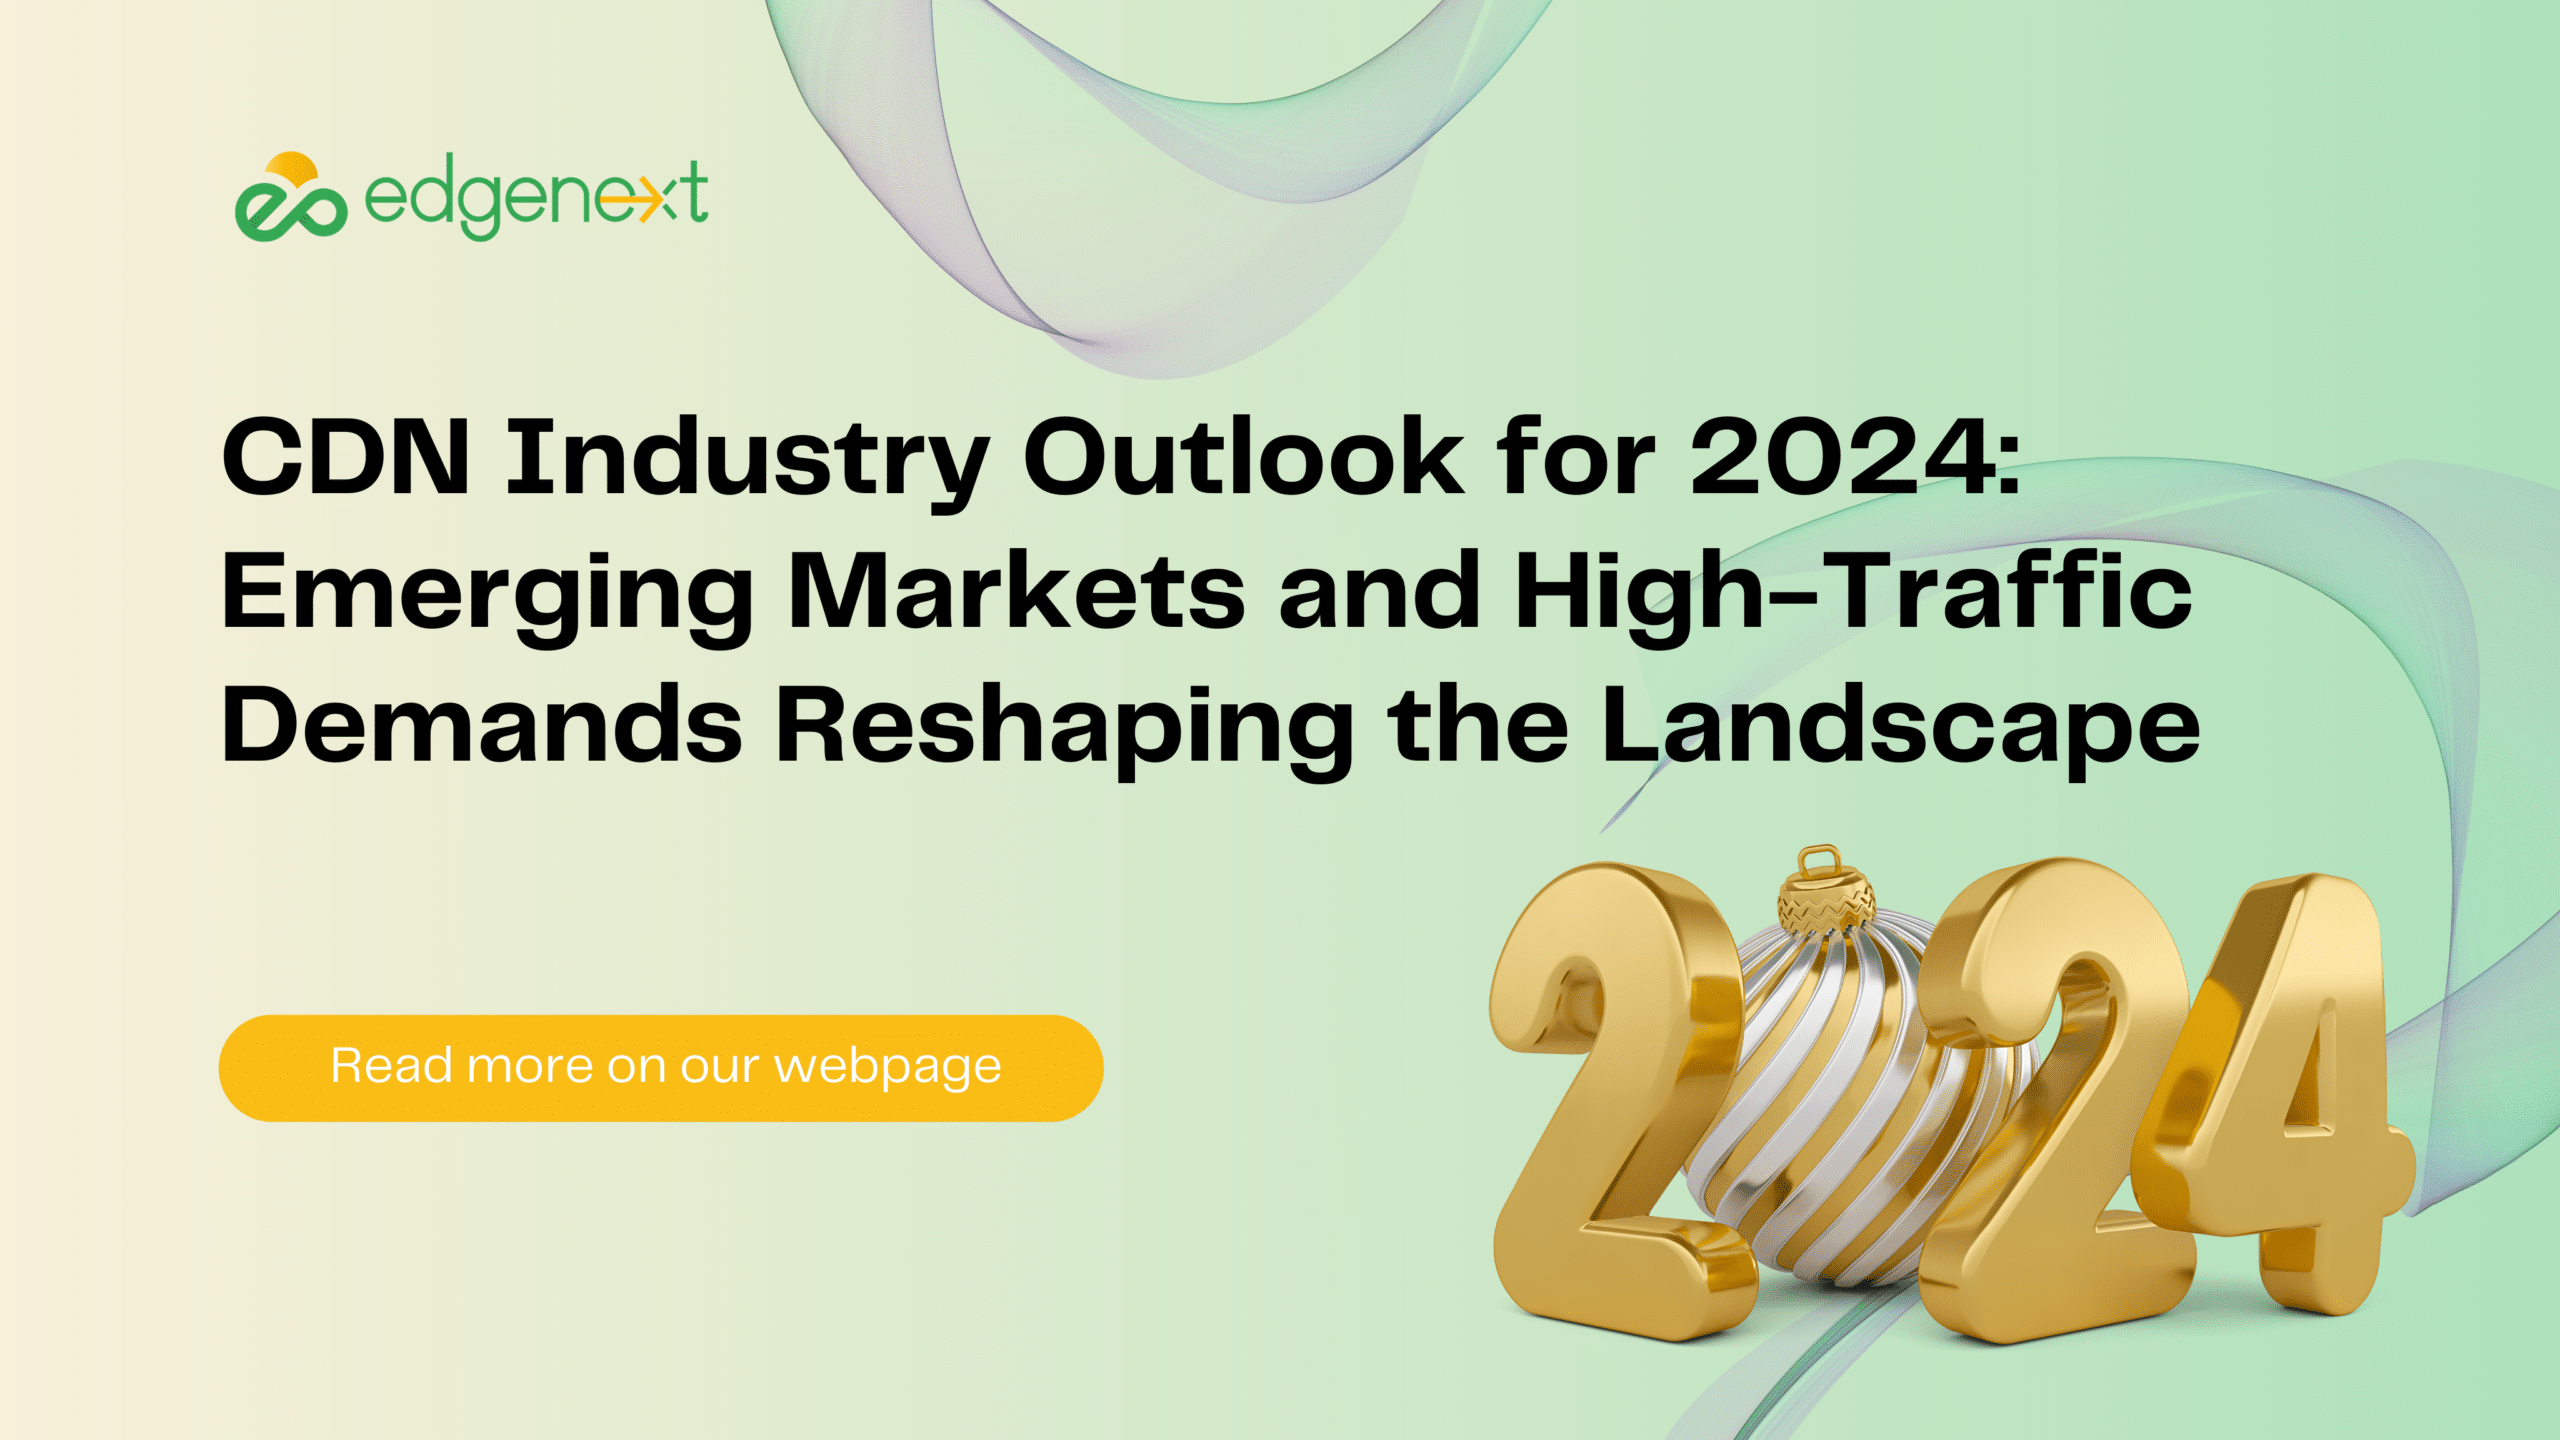 CDN Industry Outlook for 2024: Emerging Markets and High-Traffic Demands Reshaping the Landscape